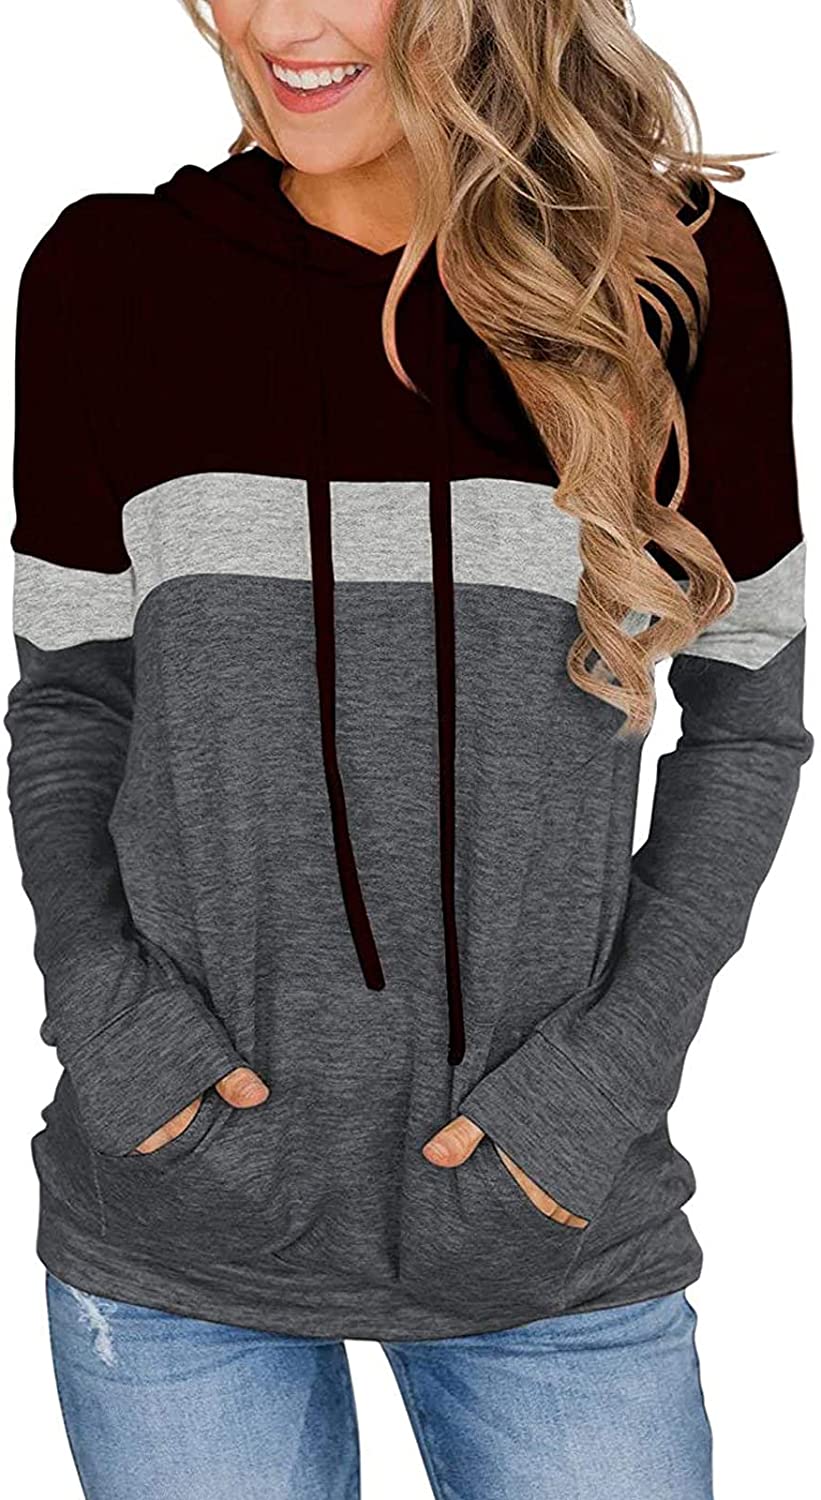 Hoodies for Women Pullover Long Sleeve Color Block Shirts with Pockets 